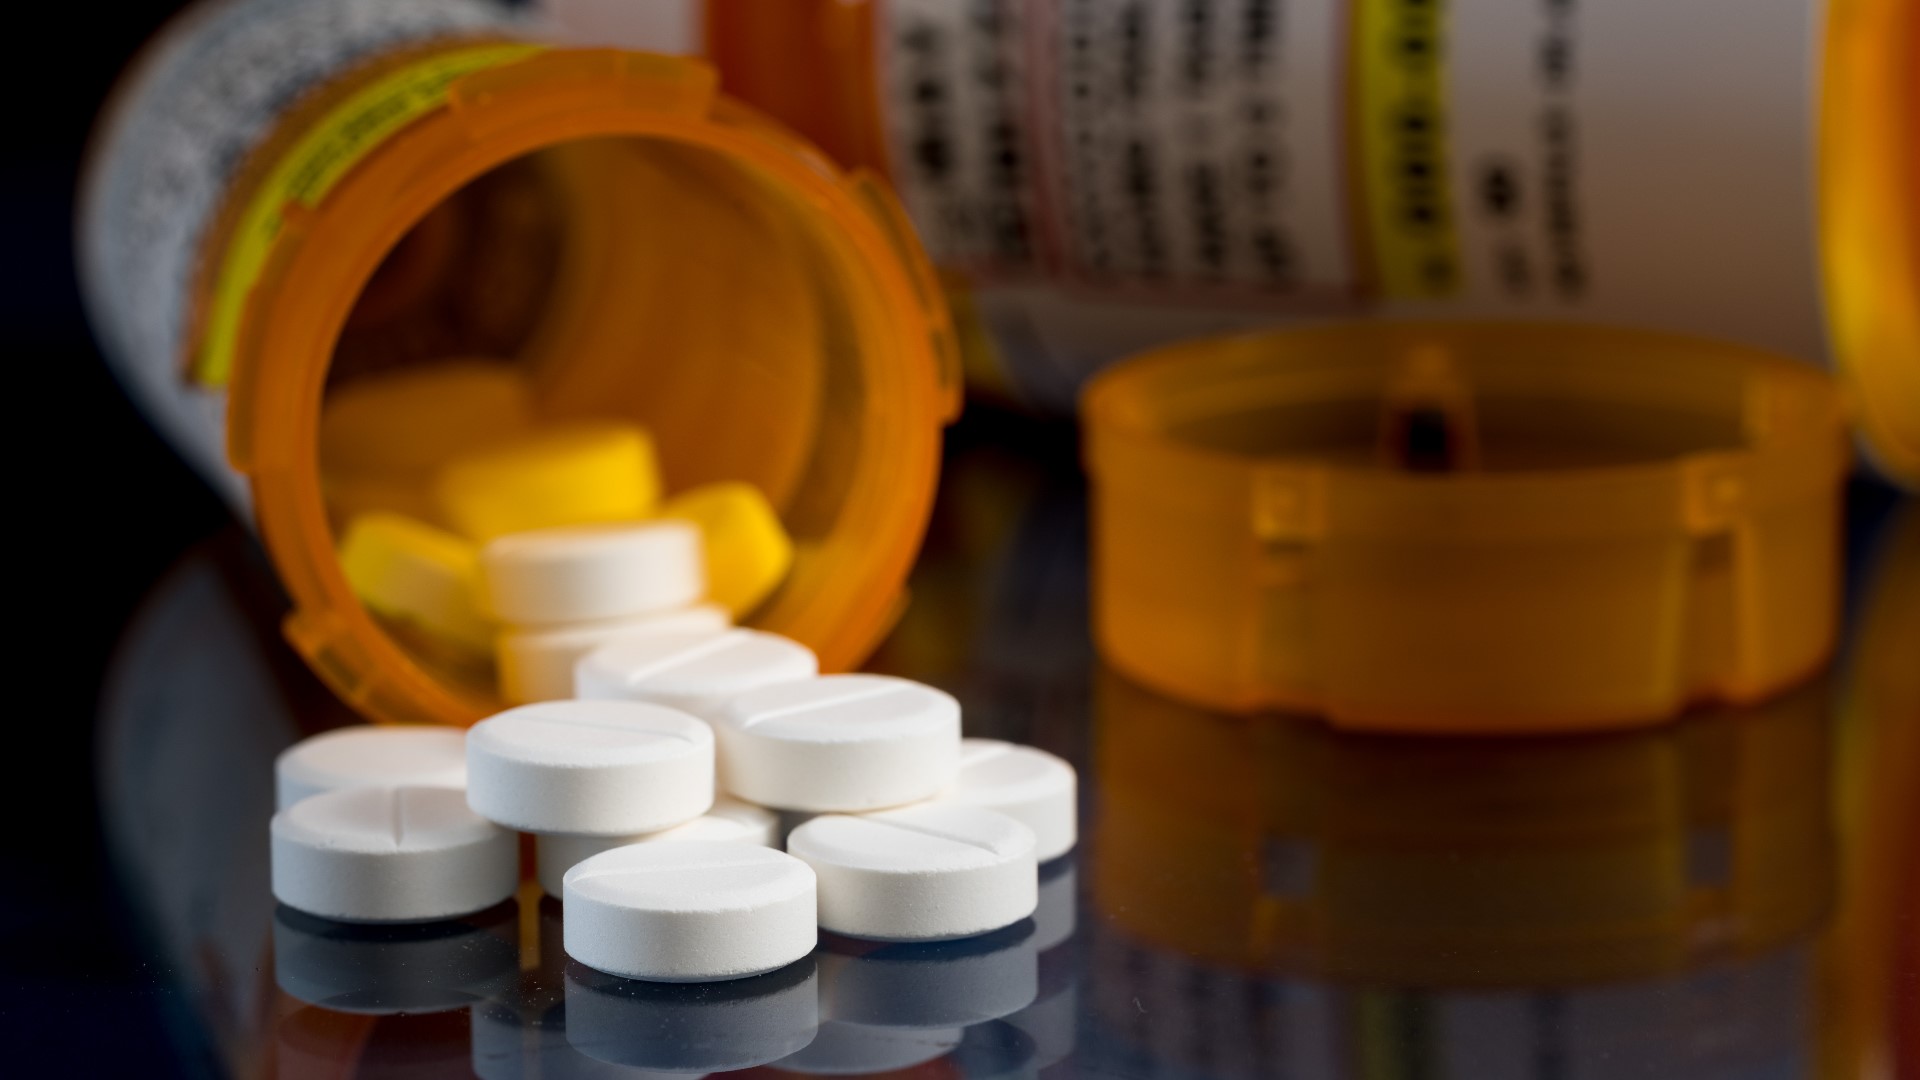 National Drug Take Back Day is designed to help people get rid of unused or expired medications the right way to stay safe and protect the environment.